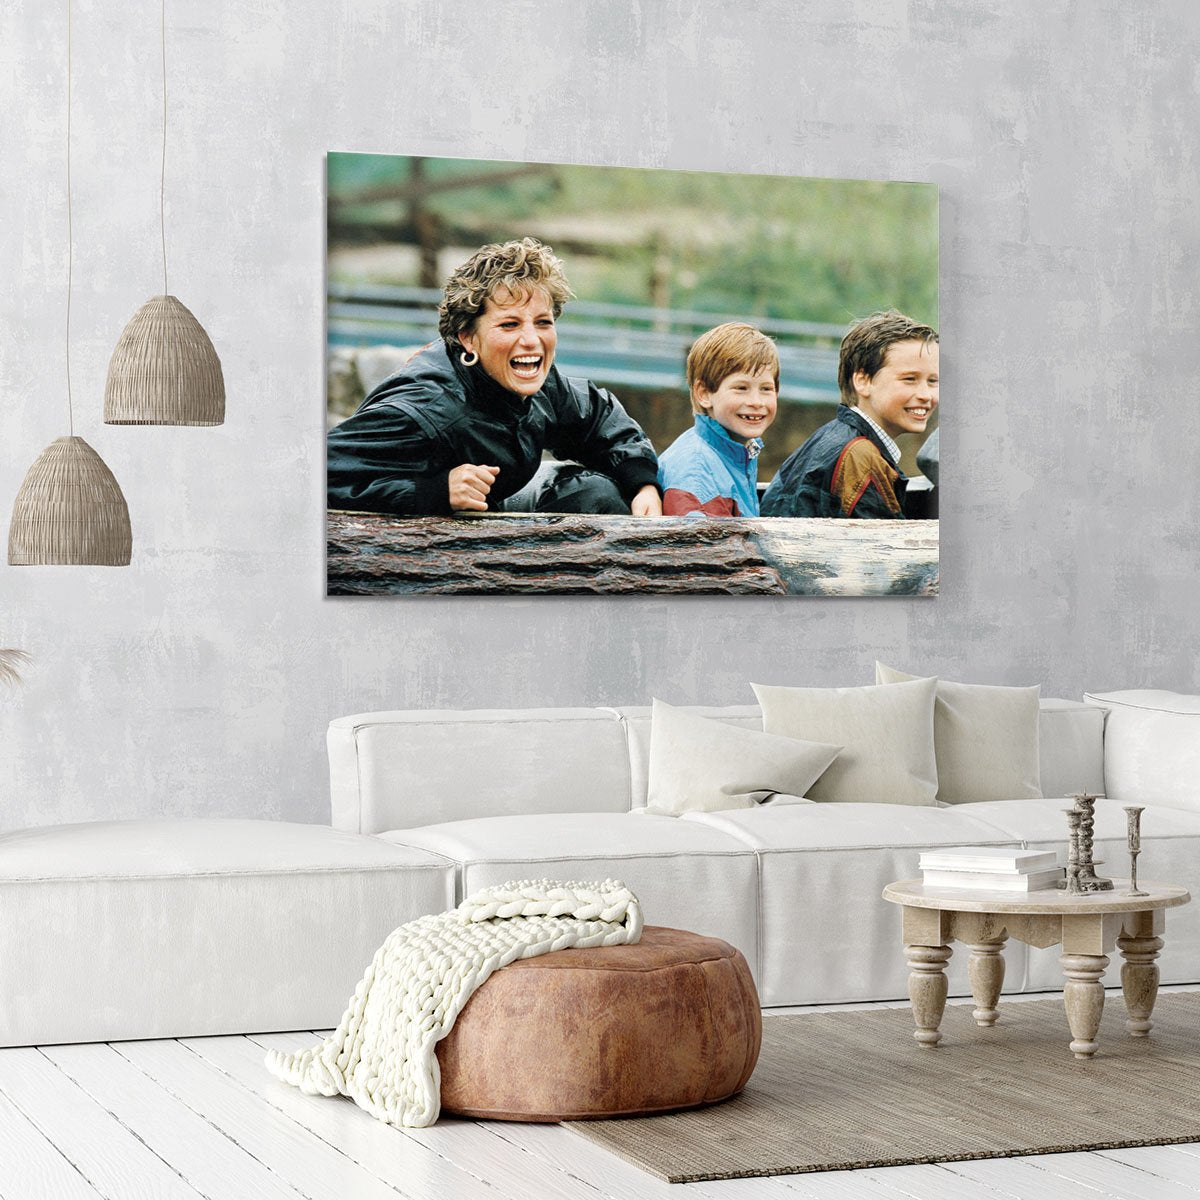 Princess Diana with Prince William and Prince Harry on ride Canvas Print or Poster